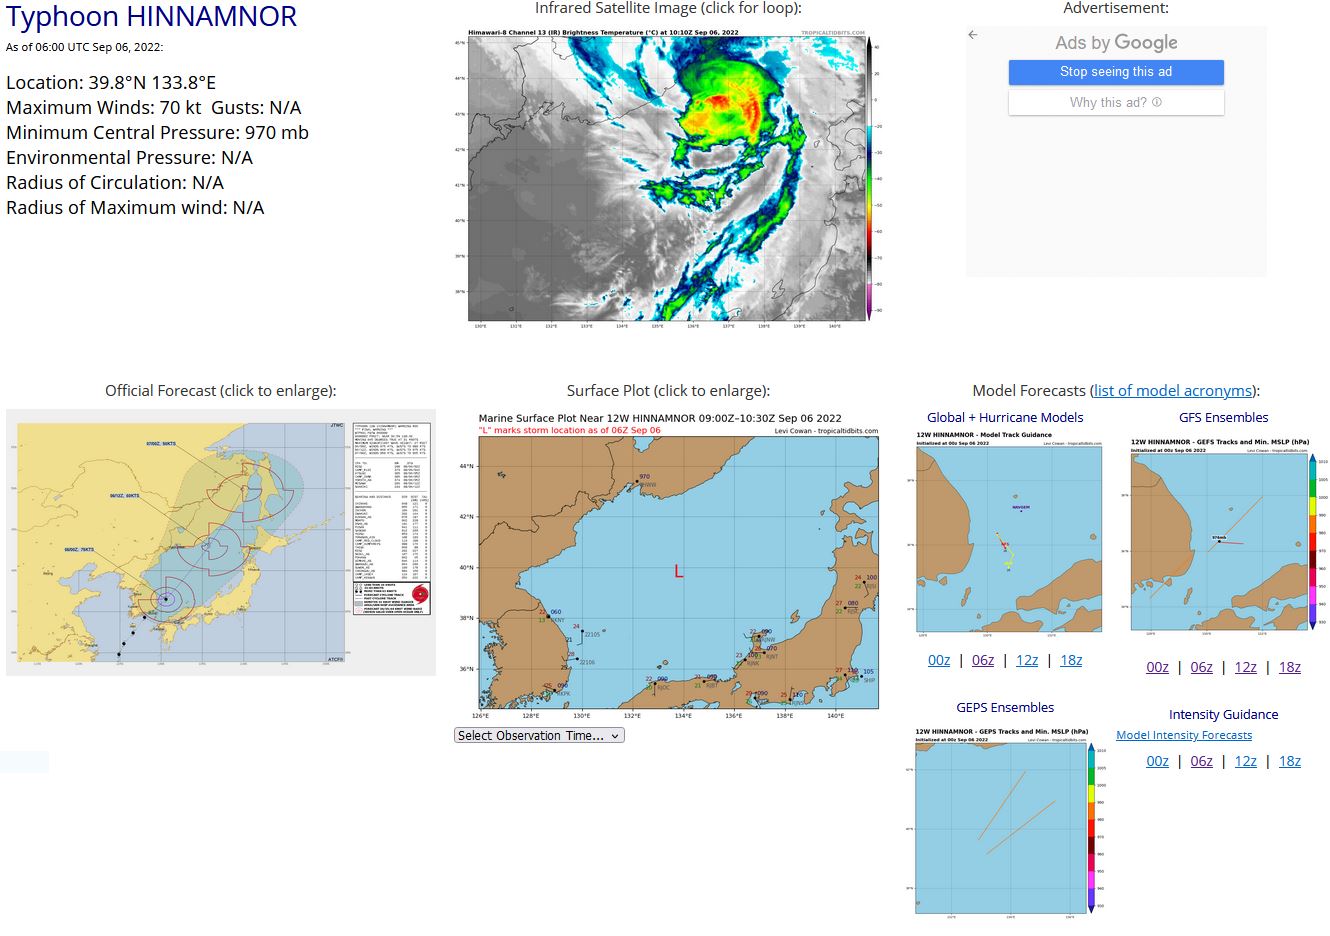 REMARKS: 060300Z POSITION NEAR 38.1N 131.9E. 06SEP22. TYPHOON (TY) 12W (HINNAMNOR), LOCATED APPROXIMATELY 111 NM NORTHEAST OF BUSAN, SOUTH KOREA, HAS TRACKED NORTHEASTWARD AT 31 KNOTS OVER THE PAST SIX HOURS. TY 12W IS EMBEDDED WITHIN A STRONG  MIDLATITUDE SHORTWAVE TROUGH WITH WEAK FRONTAL STRUCTURE, AND HAS  COMMENCED EXTRA-TROPICAL TRANSITION. ANIMATED ENHANCED INFRARED  SATELLITE IMAGERY INDICATES ASYMMETRIC CONVECTION OBSCURING THE LOW- LEVEL CIRCULATION CENTER (LLCC) WITH THE BULK OF THE DEEP CONVECTION  SHEARING POLEWARD DUE TO STRONG SOUTHERLY VERTICAL WIND SHEAR (VWS). A   060035Z AMSU-B 89GHZ MICROWAVE IMAGE INDICATES THE SYSTEM HAS  MAINTAINED A DEFINED LLCC WITH LIMITED CURVED BANDING, HOWEVER, A  DELTA RAIN REGION IS EVIDENT OVER THE NORTHERN QUADRANT. BASED ON THE  DEFINED LLCC, RJTD RADAR FIX AND A 060036Z ASCAT AMBIGUITY IMAGE,  THERE IS HIGH CONFIDENCE IN THE INITIAL POSITION. THE INITIAL  INTENSITY IS ASSESSED AT 75 KNOTS PRIMARILY BASED ON A 052124Z  RADARSAT2 SAR PASS SHOWING A SWATH OF 70-78 KNOT WINDS OVER THE EAST  AND SOUTHEAST QUADRANTS. DVORAK CURRENT INTENSITY ESTIMATES OF 4.5 (77  KNOTS) FROM RJTD AND PGTW ALSO SUPPORT THE ASSESSMENT. ALTHOUGH NOT  OVERLY IMPRESSIVE, SURFACE OBSERVATIONS FROM BUSAN AROUND 051900- 2100Z, INDICATED MAXIMUM WINDS OF 35 KNOTS GUSTING TO 64 KNOTS AND  MINIMUM SLP NEAR 967MB, WHICH CORRESPONDS TO A 75 KNOT SYSTEM. TY 12W  IS FORECAST TO RAPIDLY TRANSITION INTO A STRONG EXTRA-TROPICAL, COLD- CORE LOW BY TAU 12 AS IT GAINS FRONTAL CHARACTERISTICS AND APPROACHES  THE MIDLATITUDE JET WITH VERY HIGH VWS (40-50 KNOTS). THIS IS THE  FINAL WARNING ON THIS SYSTEM BY THE JOINT TYPHOON WRNCEN PEARL HARBOR  HI. THE SYSTEM WILL BE CLOSELY MONITORED FOR SIGNS OF REGENERATION.  MAXIMUM SIGNIFICANT WAVE HEIGHT AT 060000Z IS 27 FEET.